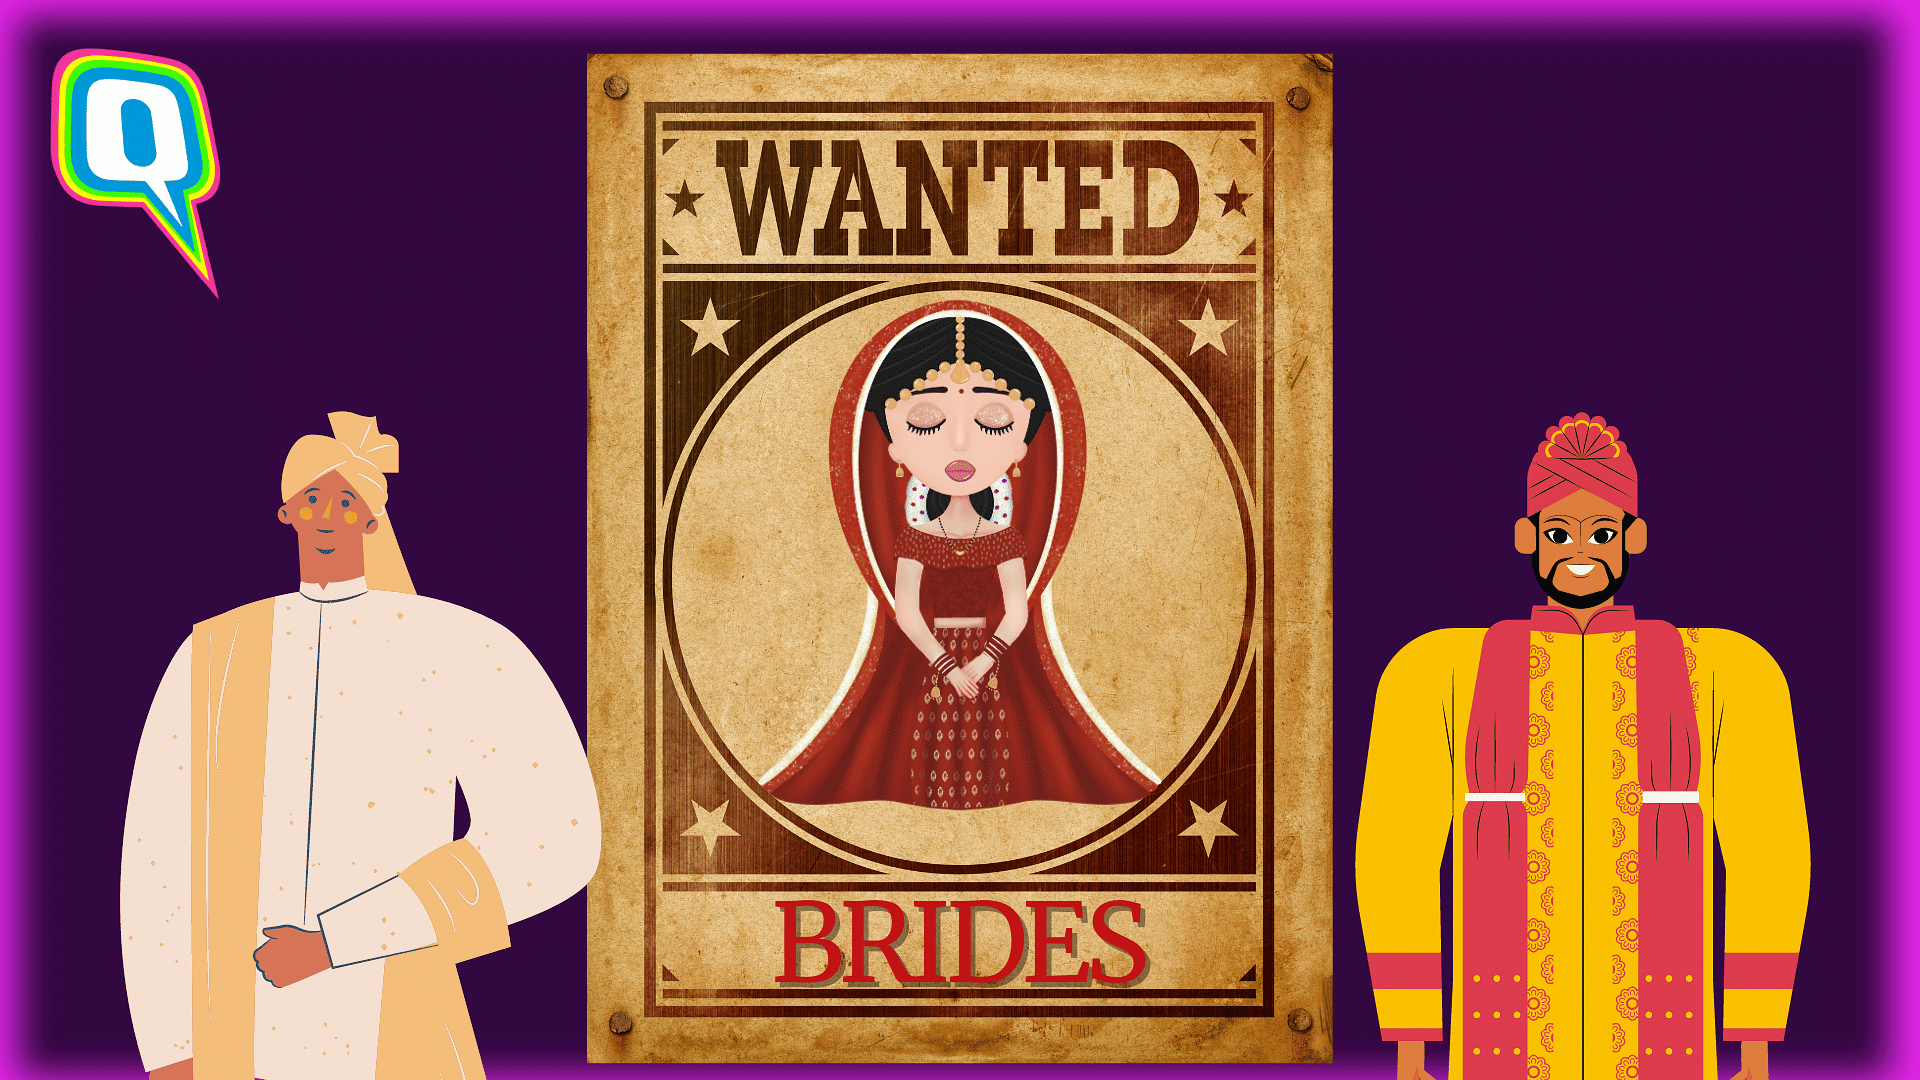 <div class="paragraphs"><p>Wanted Brides: 200 men to hold a bachelor's march to find suitable brides.&nbsp;</p></div>